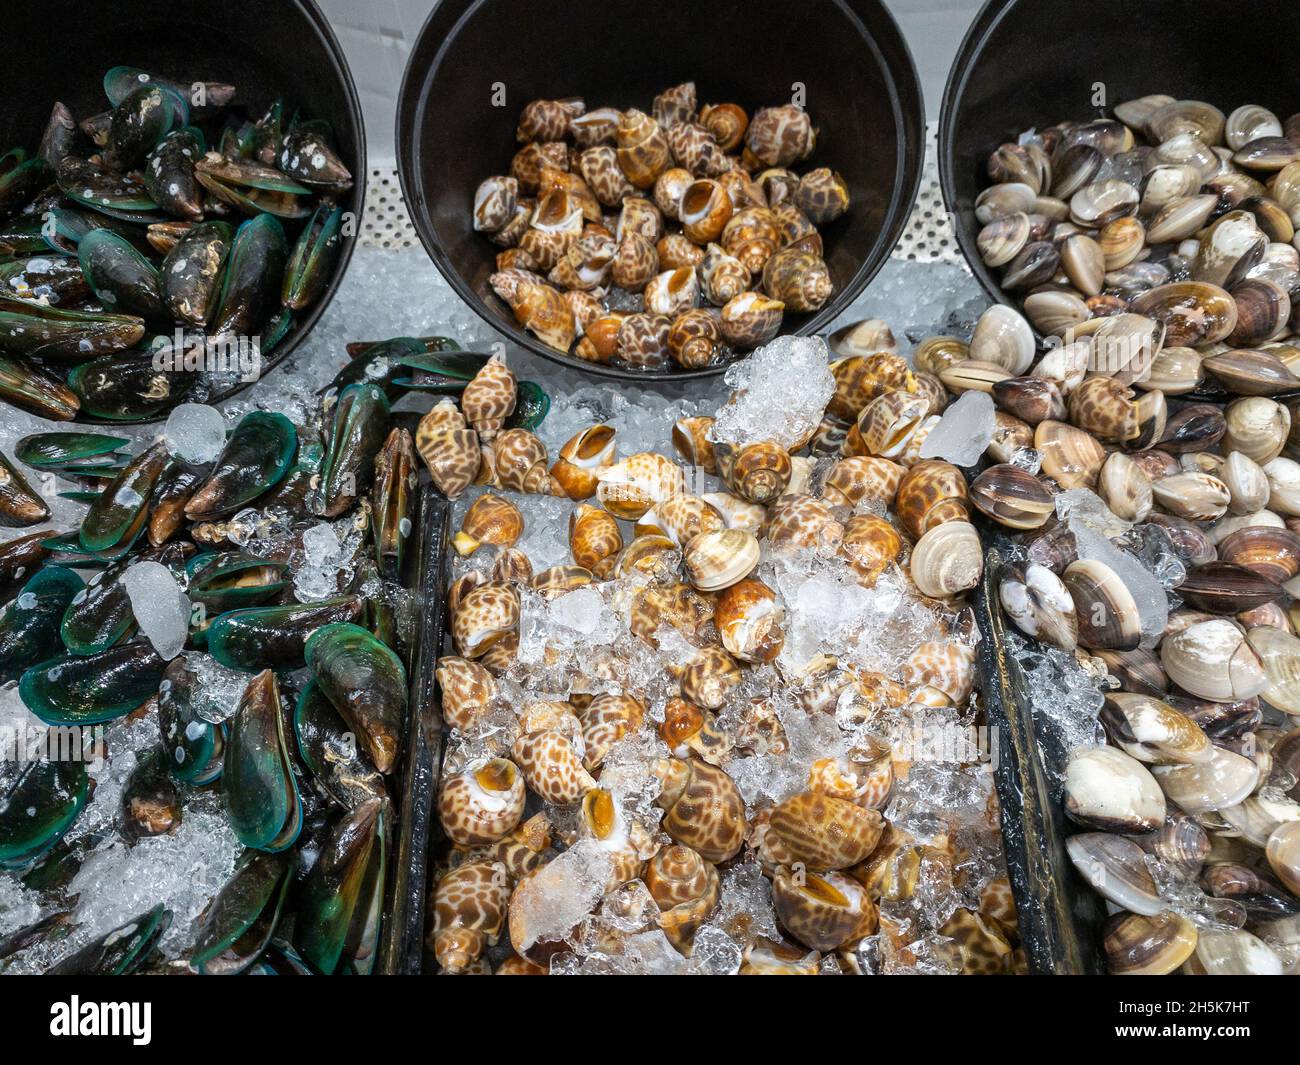 Group of the fresh mussels, Mercenaria mercenaria (quahog), babylonia areolata in the plastic tray with crushed ice for sale at the seafood market nea Stock Photo